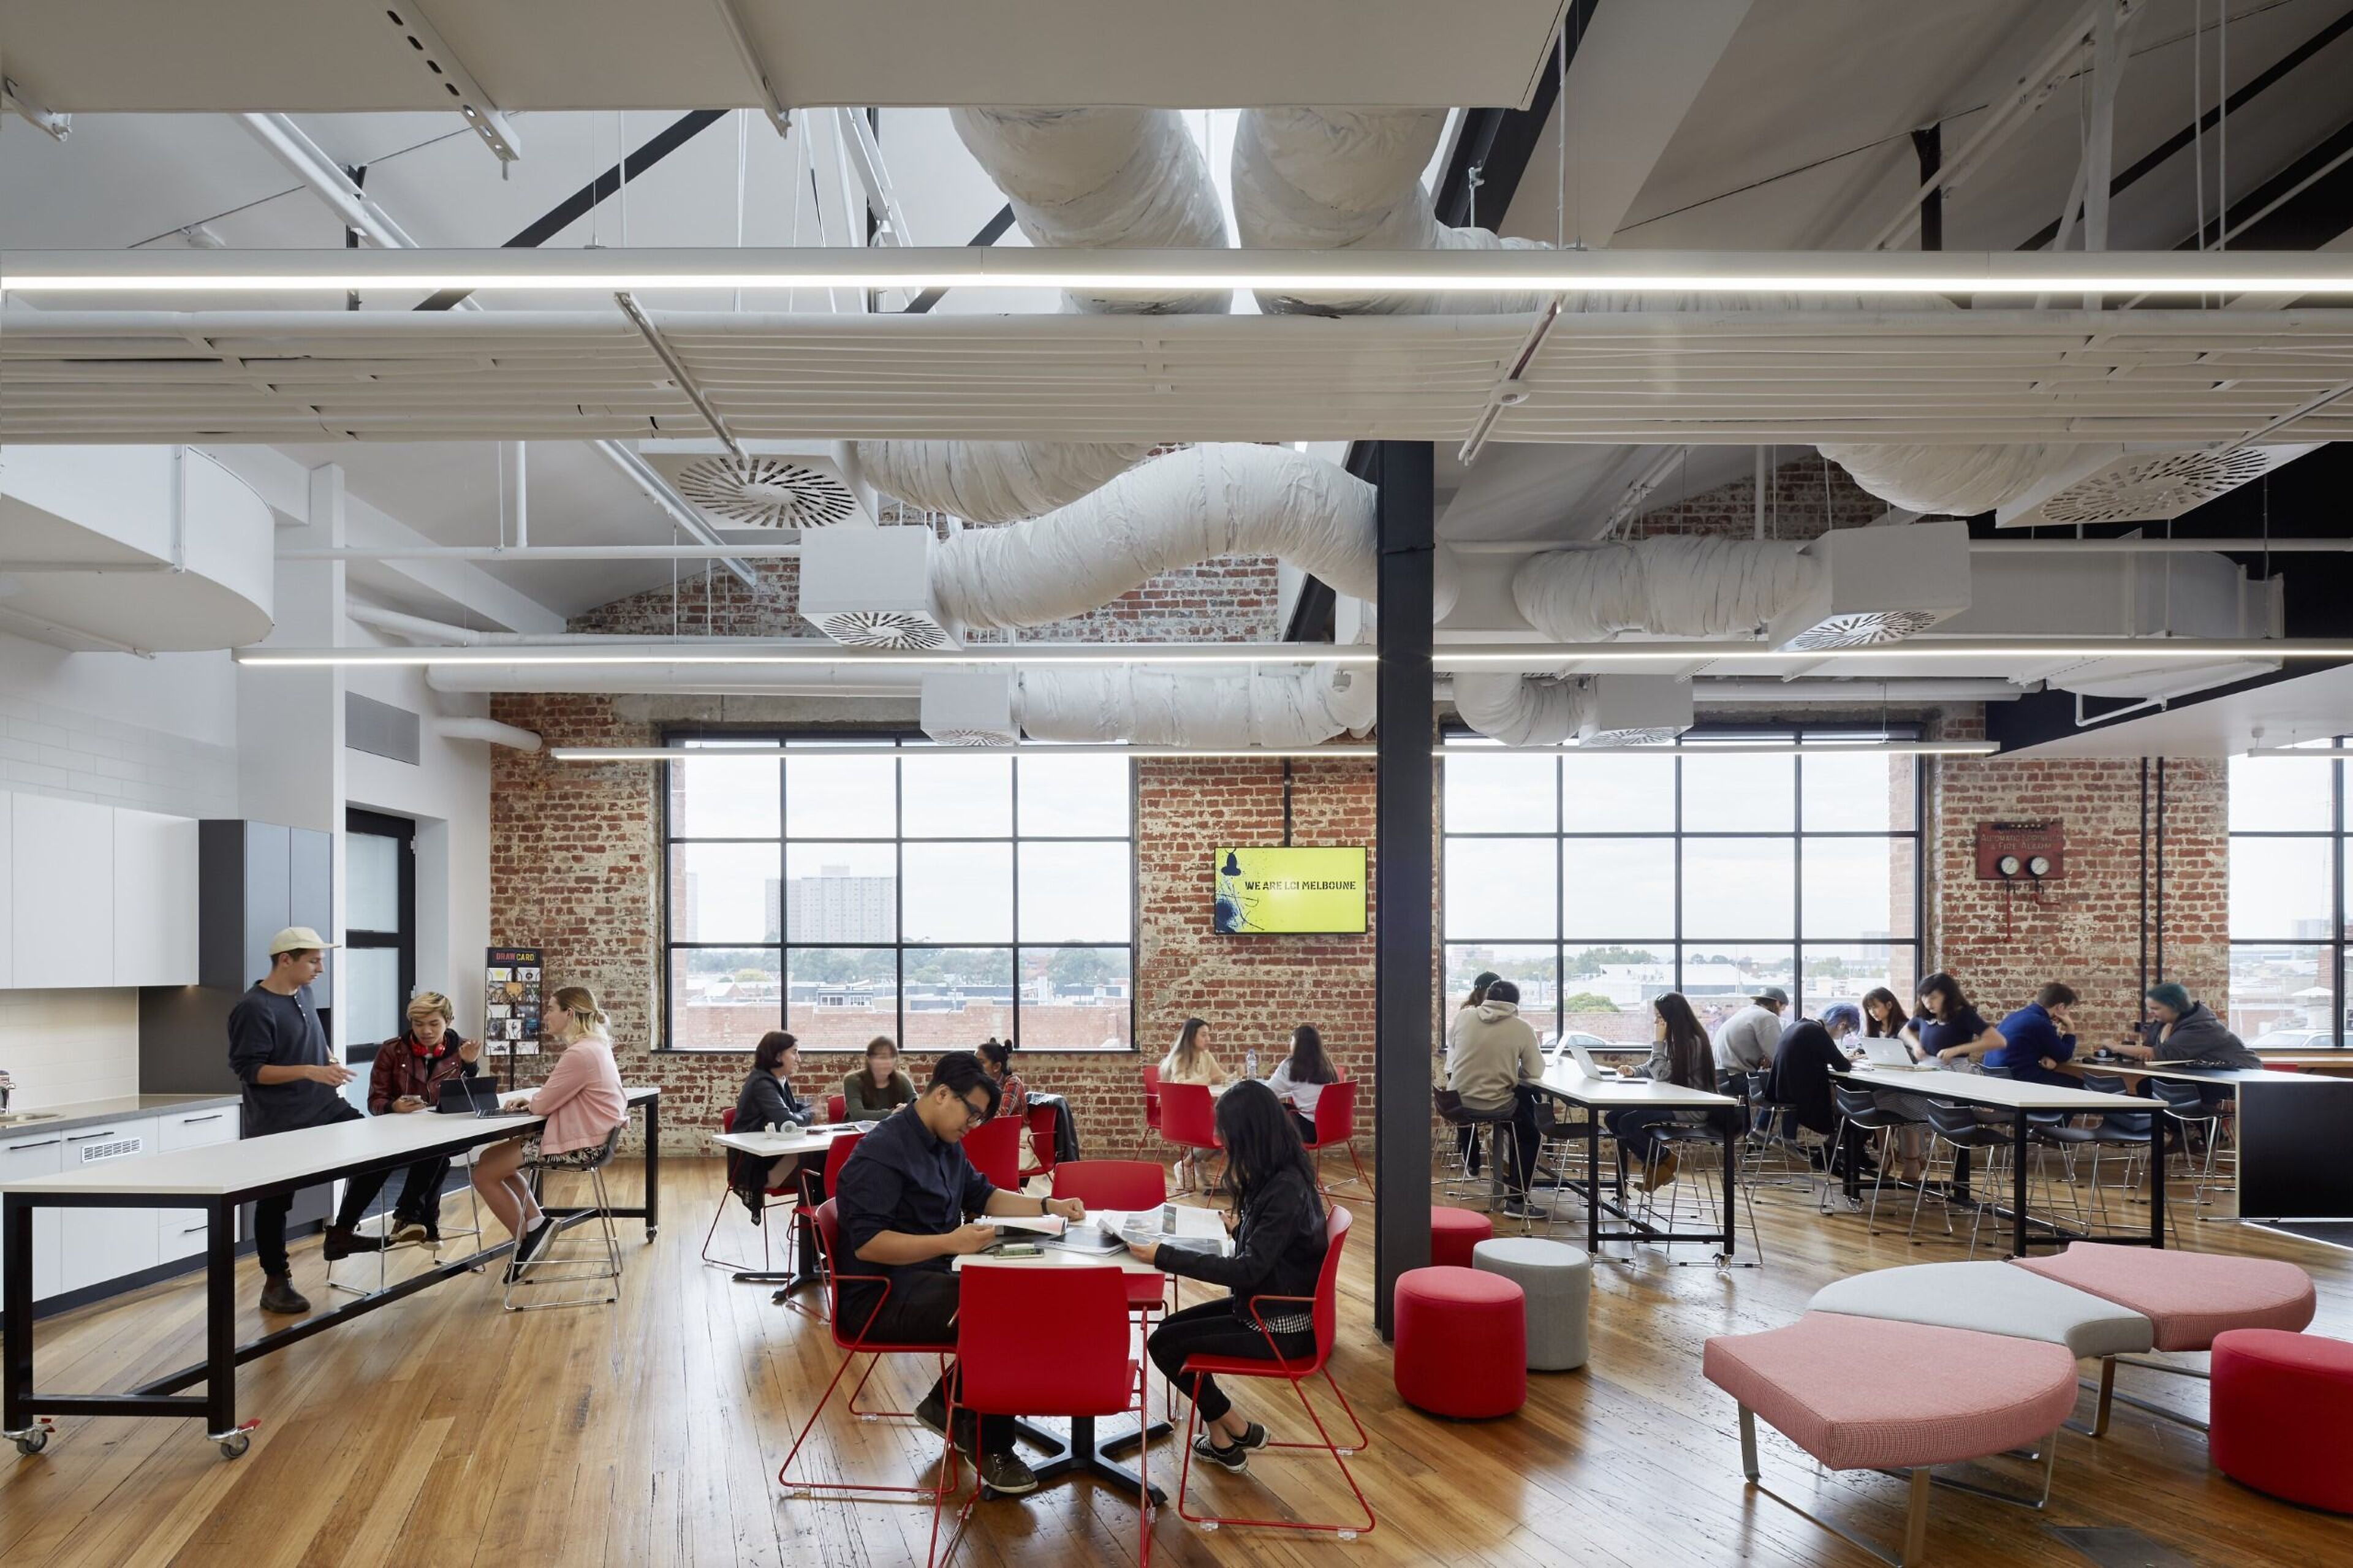 Students study and collaborate in a stylish, brick-walled communal space with large windows.